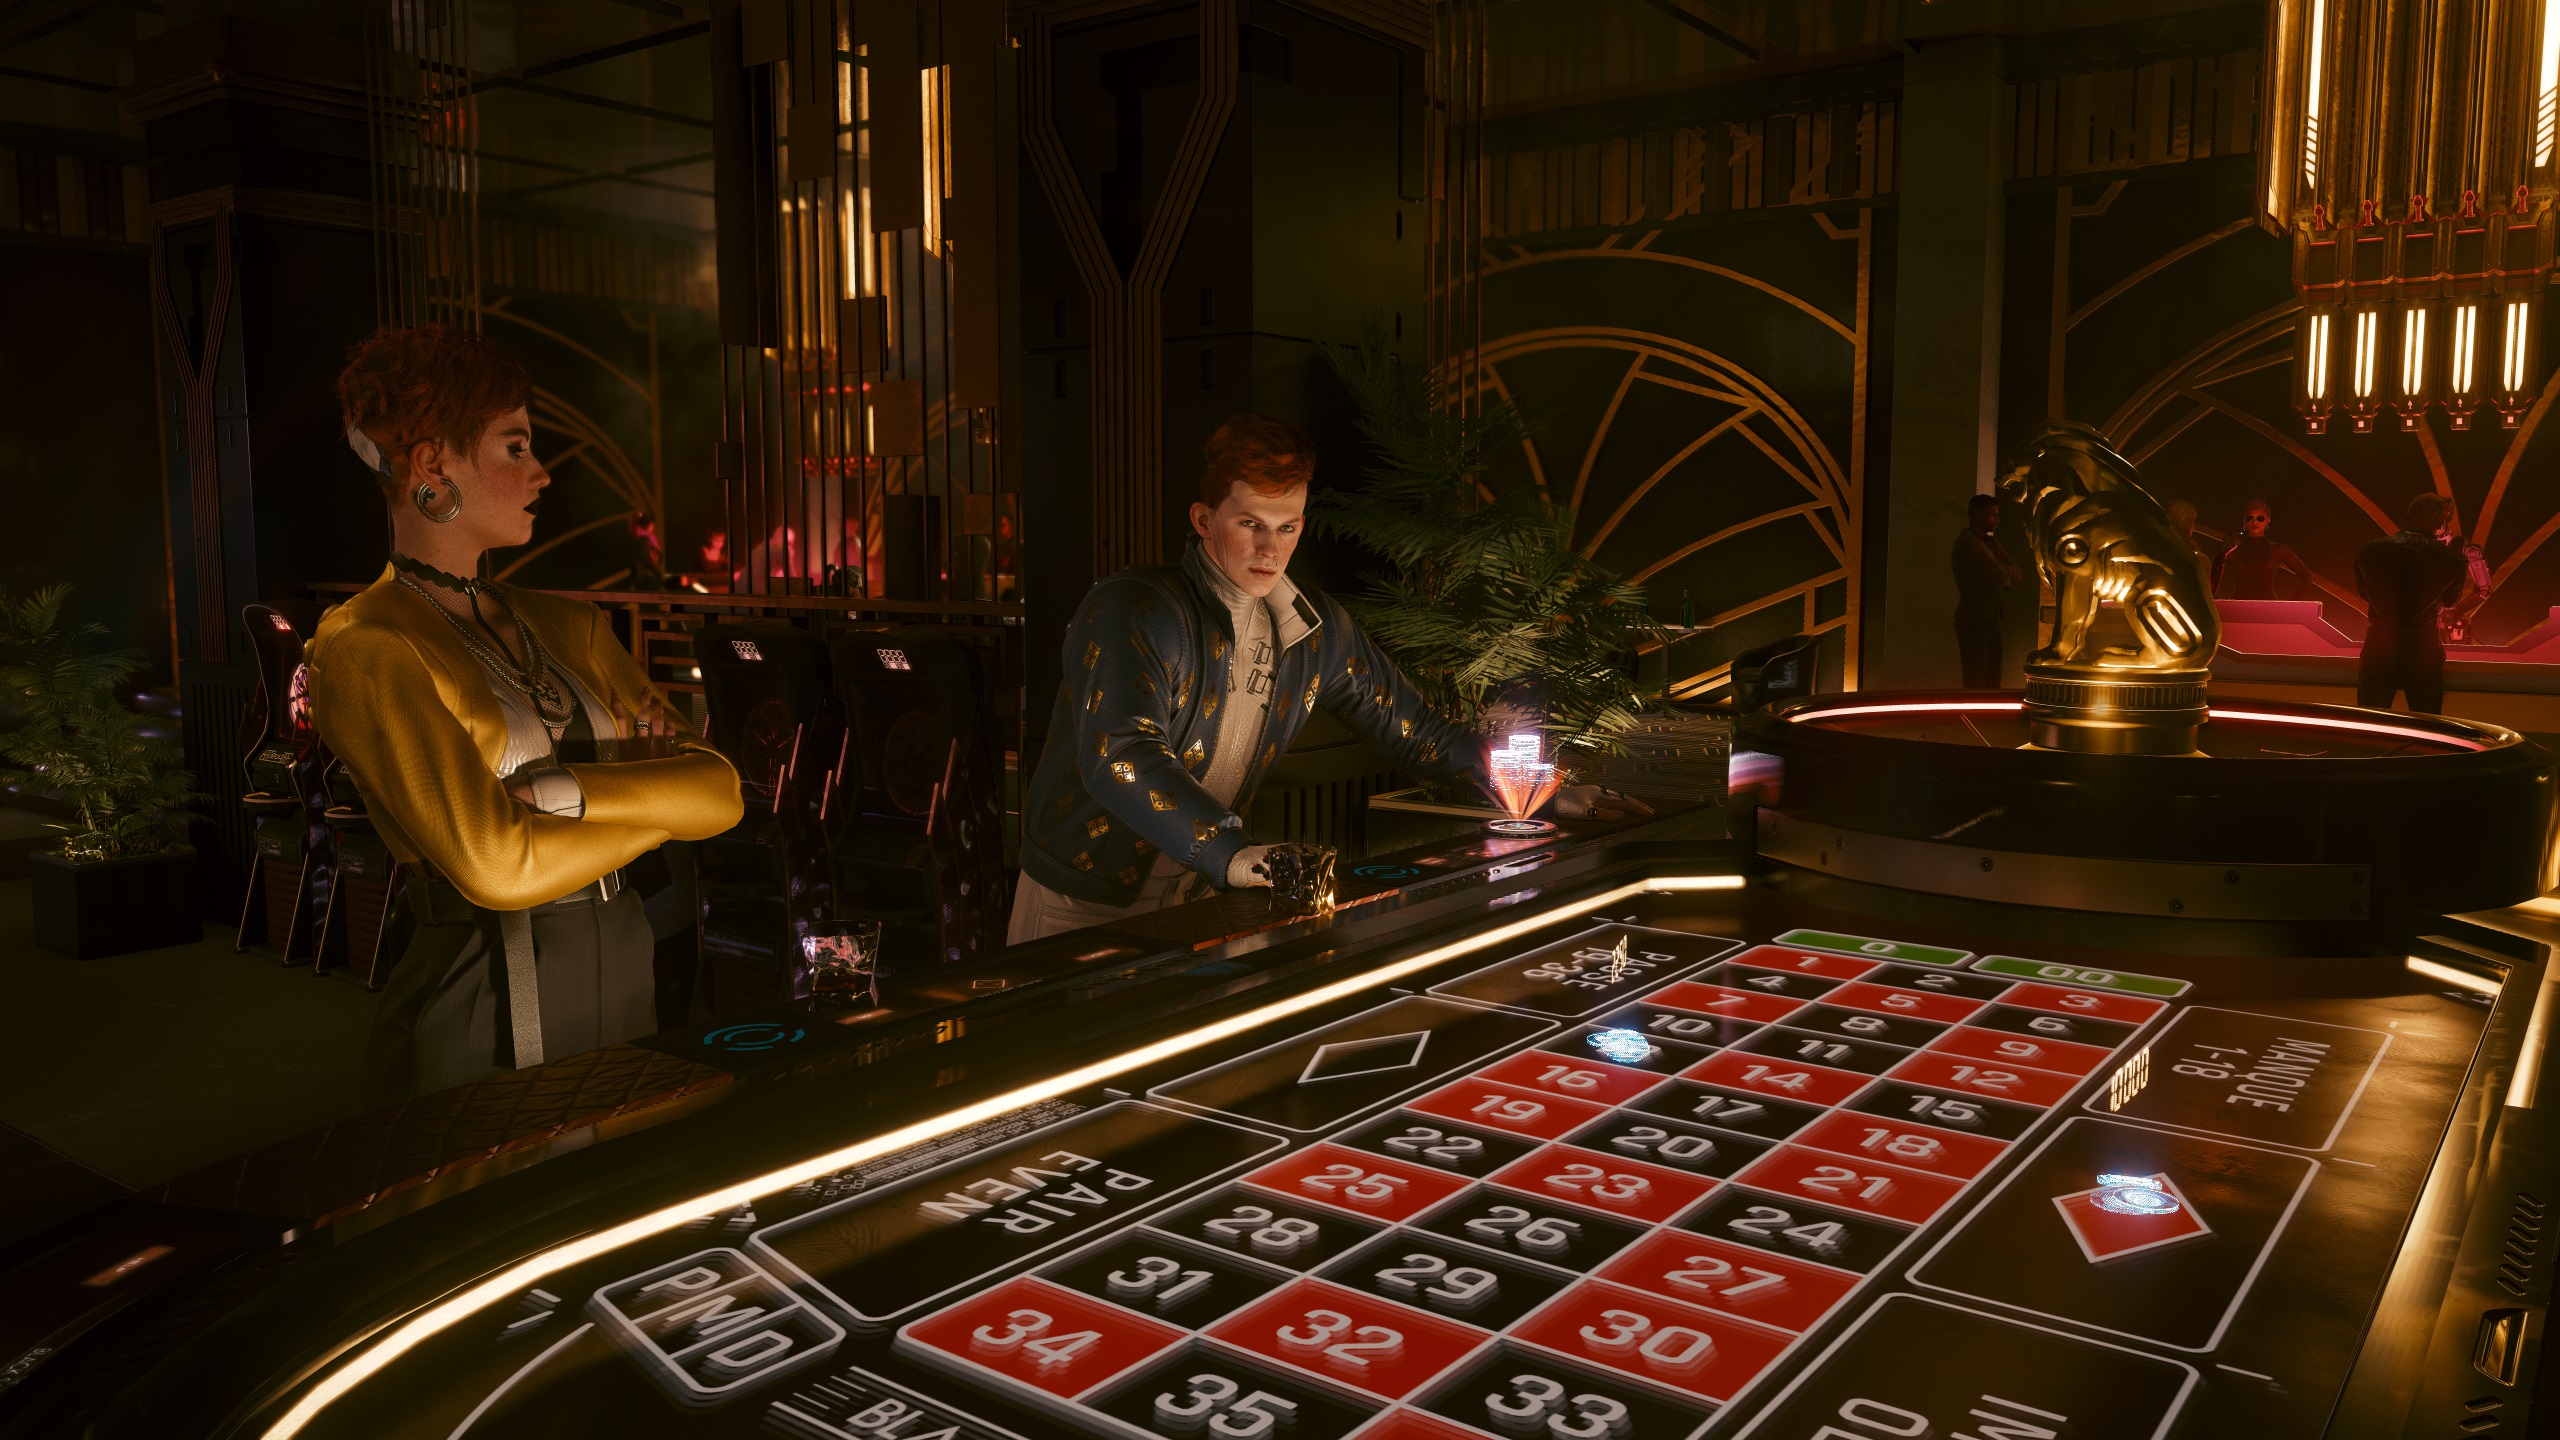 Redheaded twins playing roulette